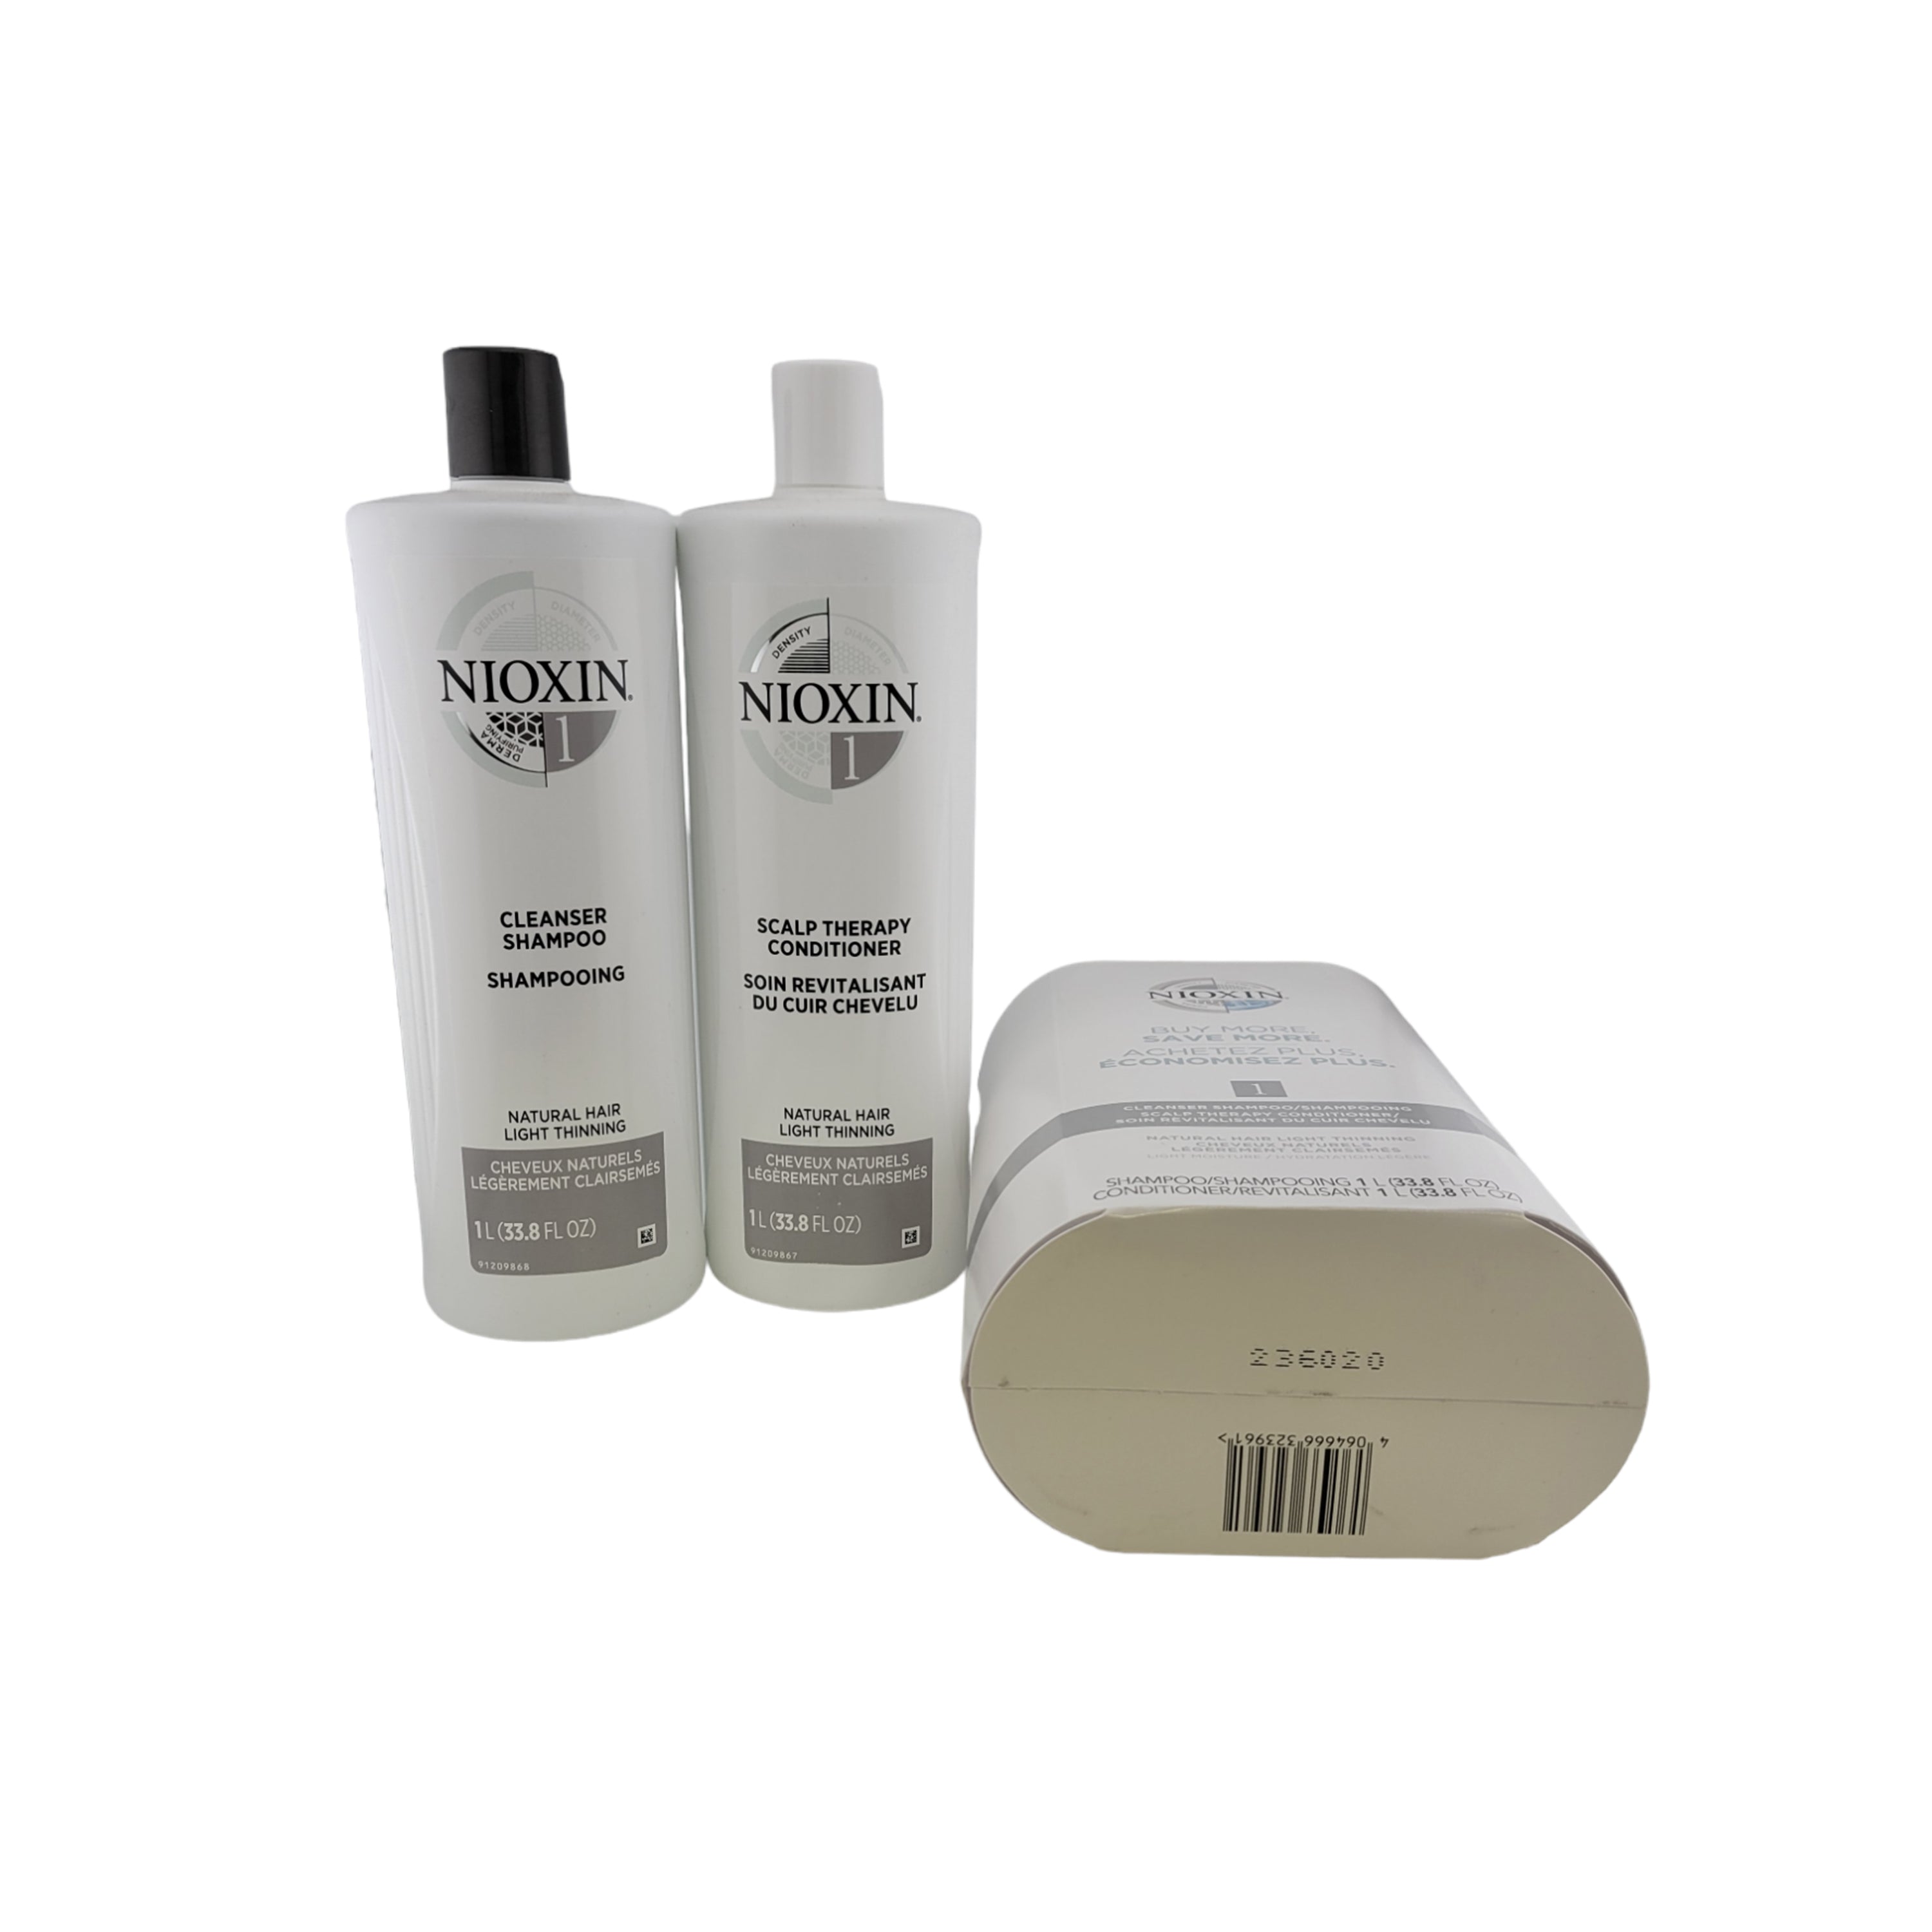 Nioxin System 1 Duo (Cleanser Shampoo and Scalp Therapy Conditioner)